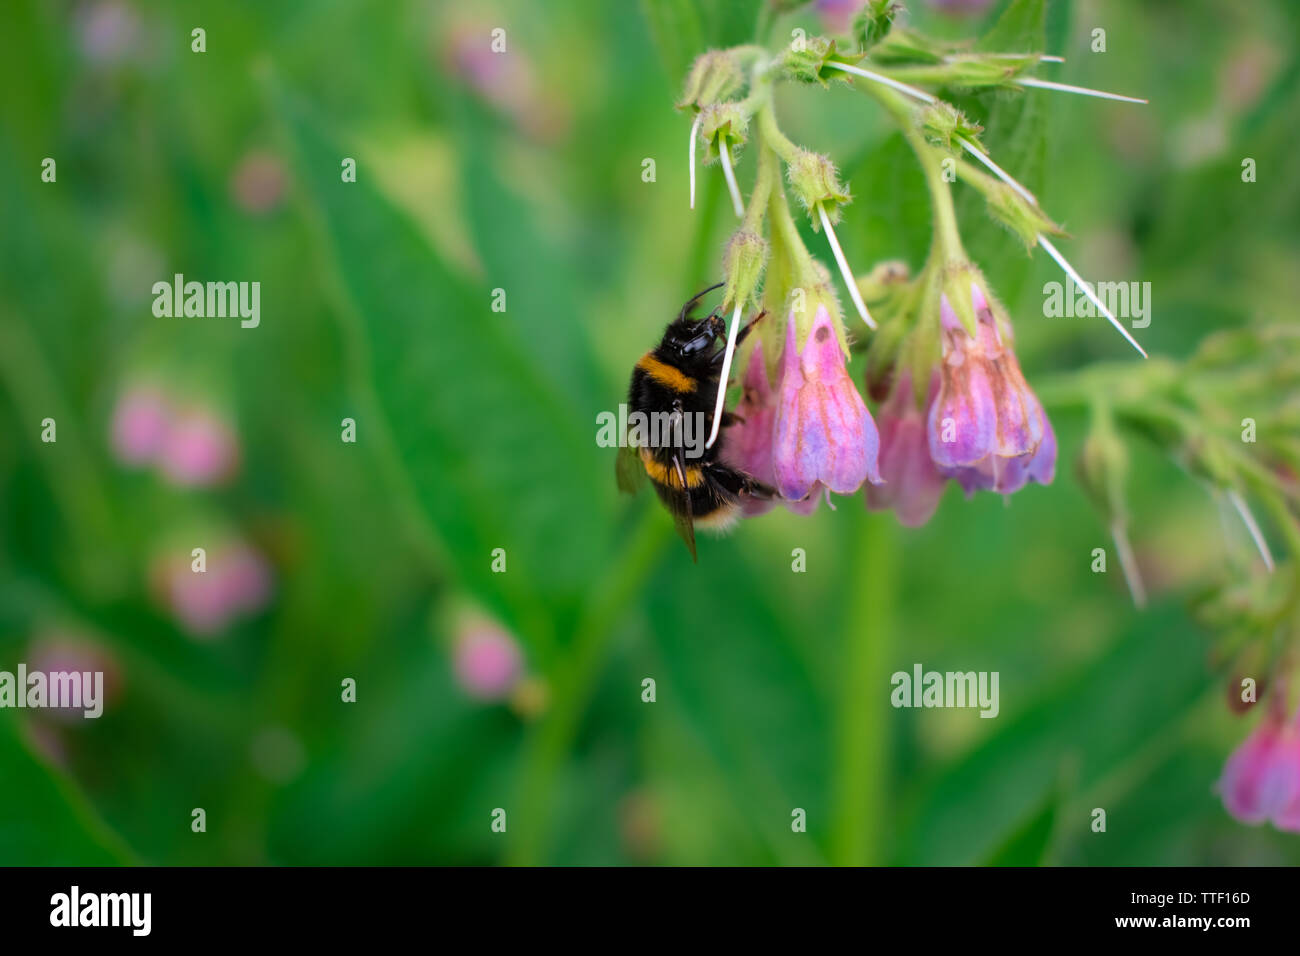 A bumble bee gathers nectar from flowers in Spring Stock Photo